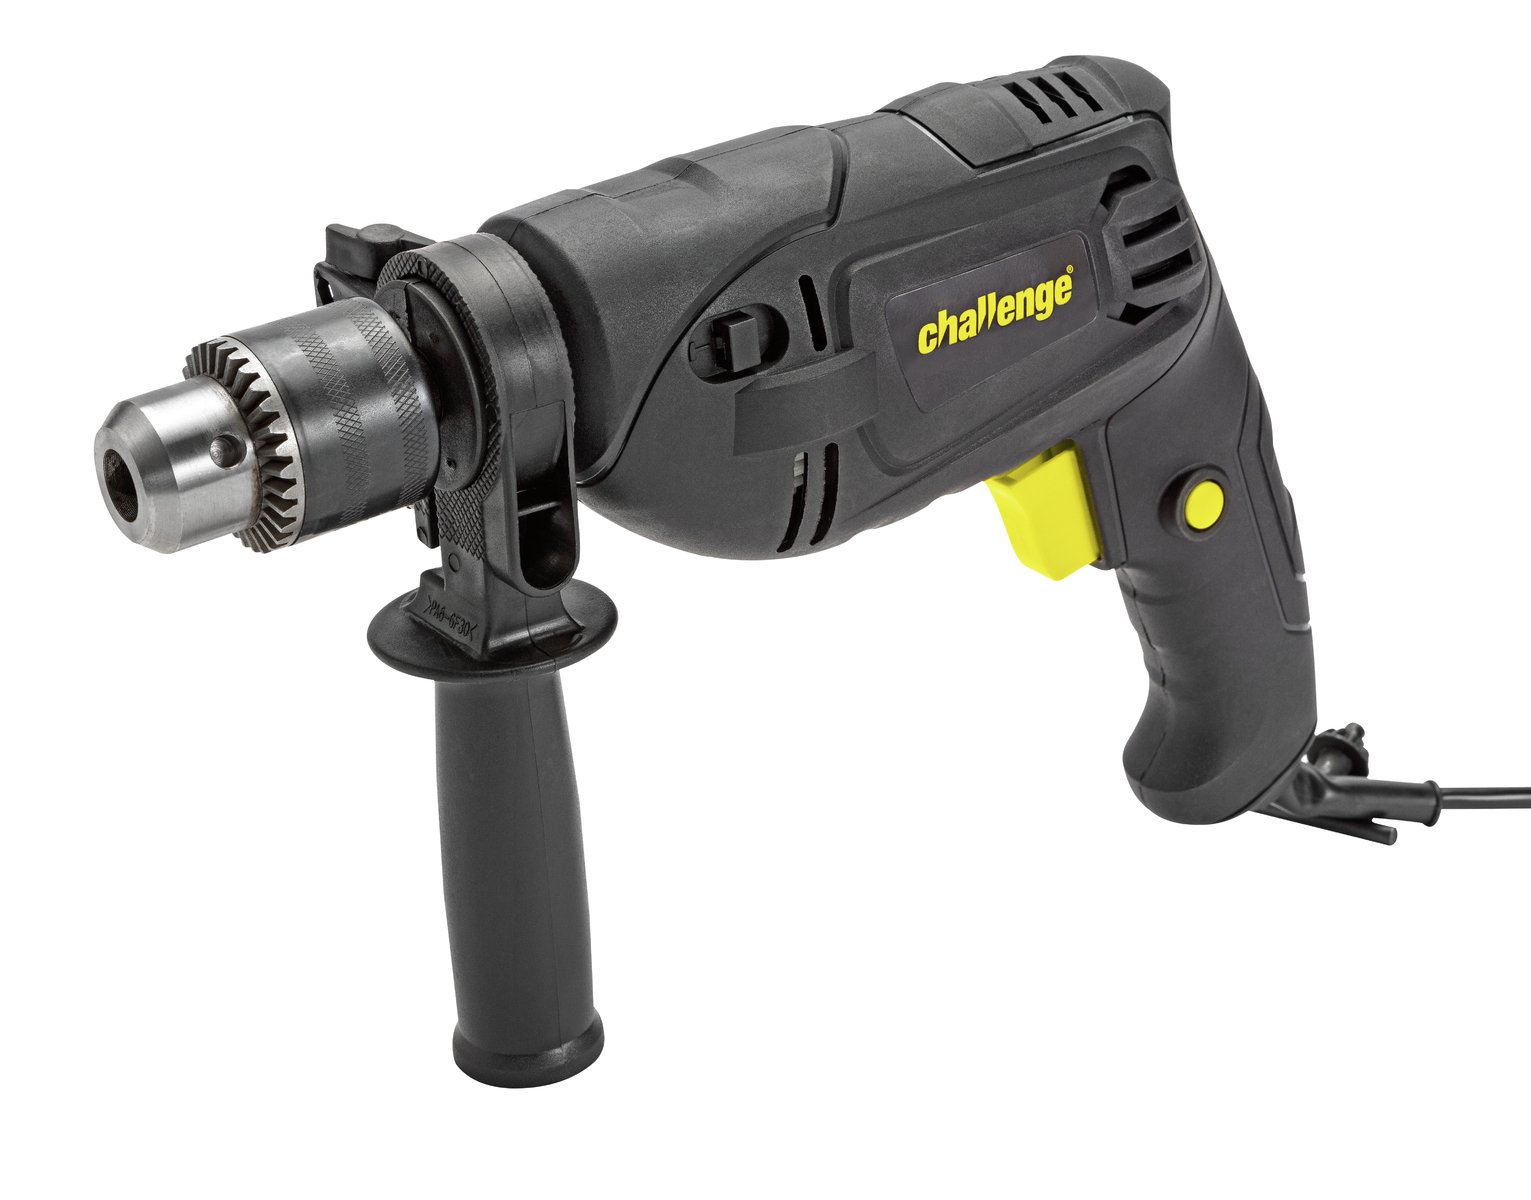 Challenge Corded Impact Drill - 500W